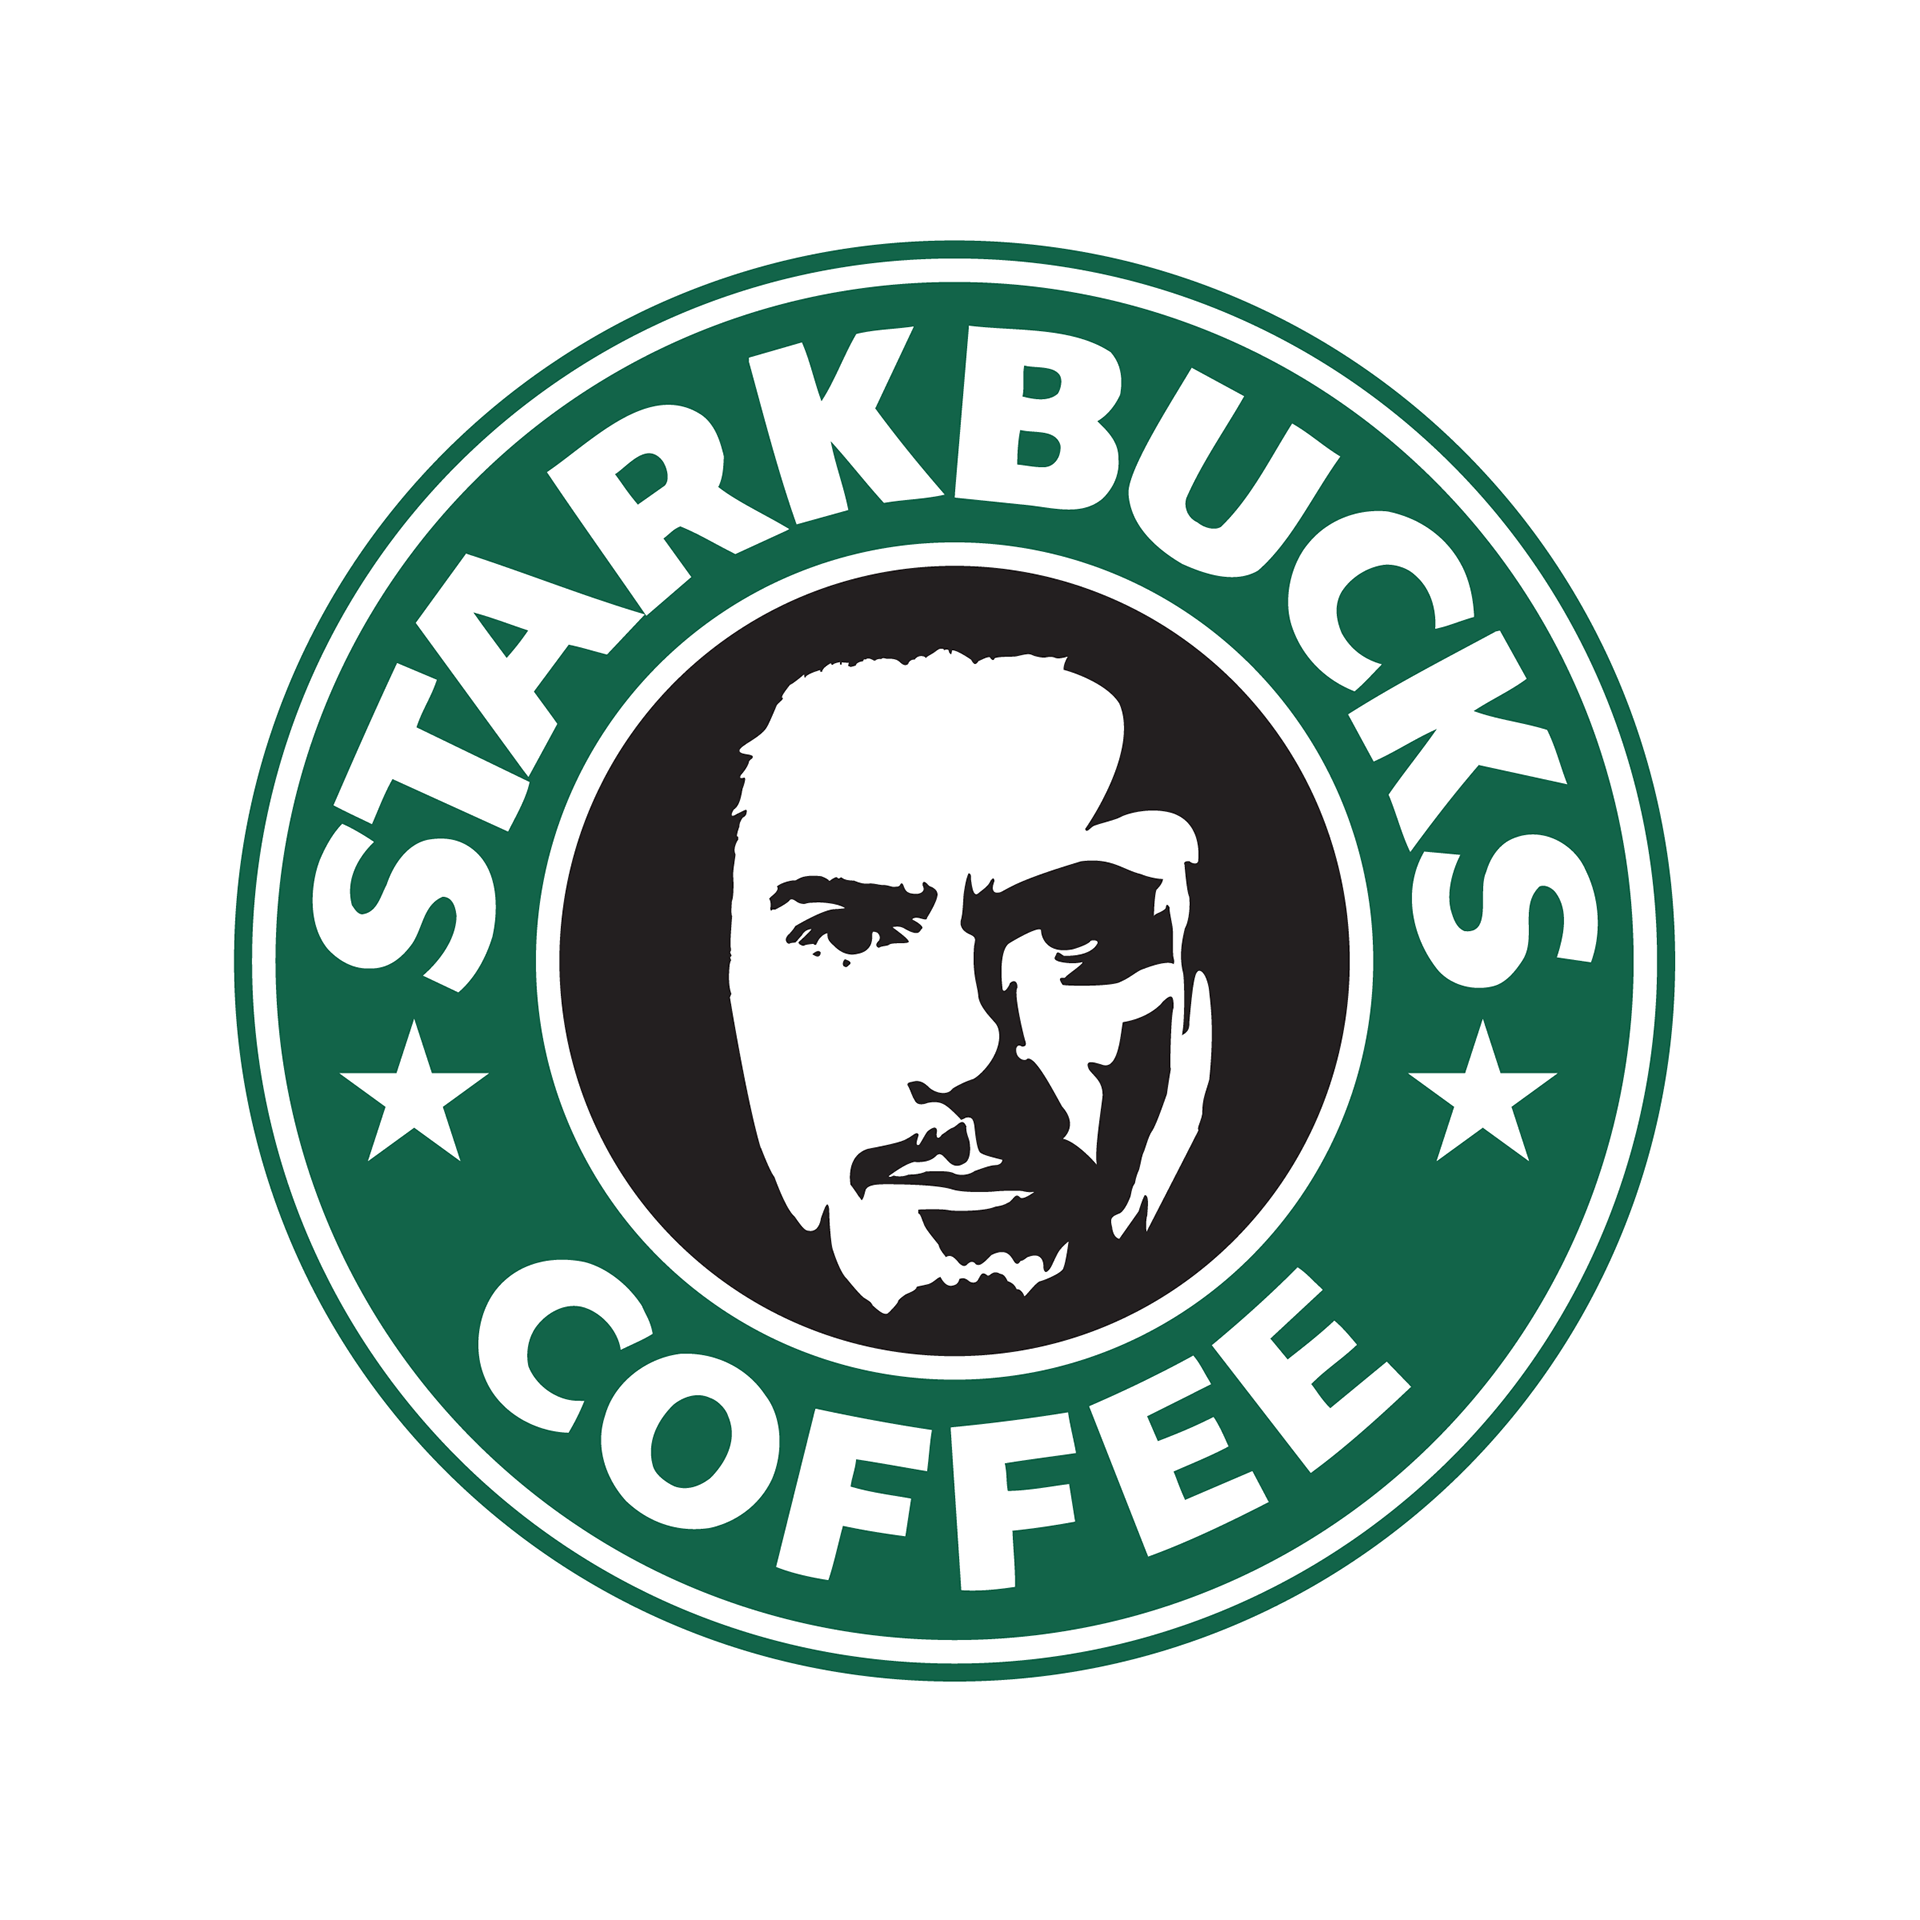 Logo Coffee Starbucks Brand Cafe Coffee Png Download 19201920